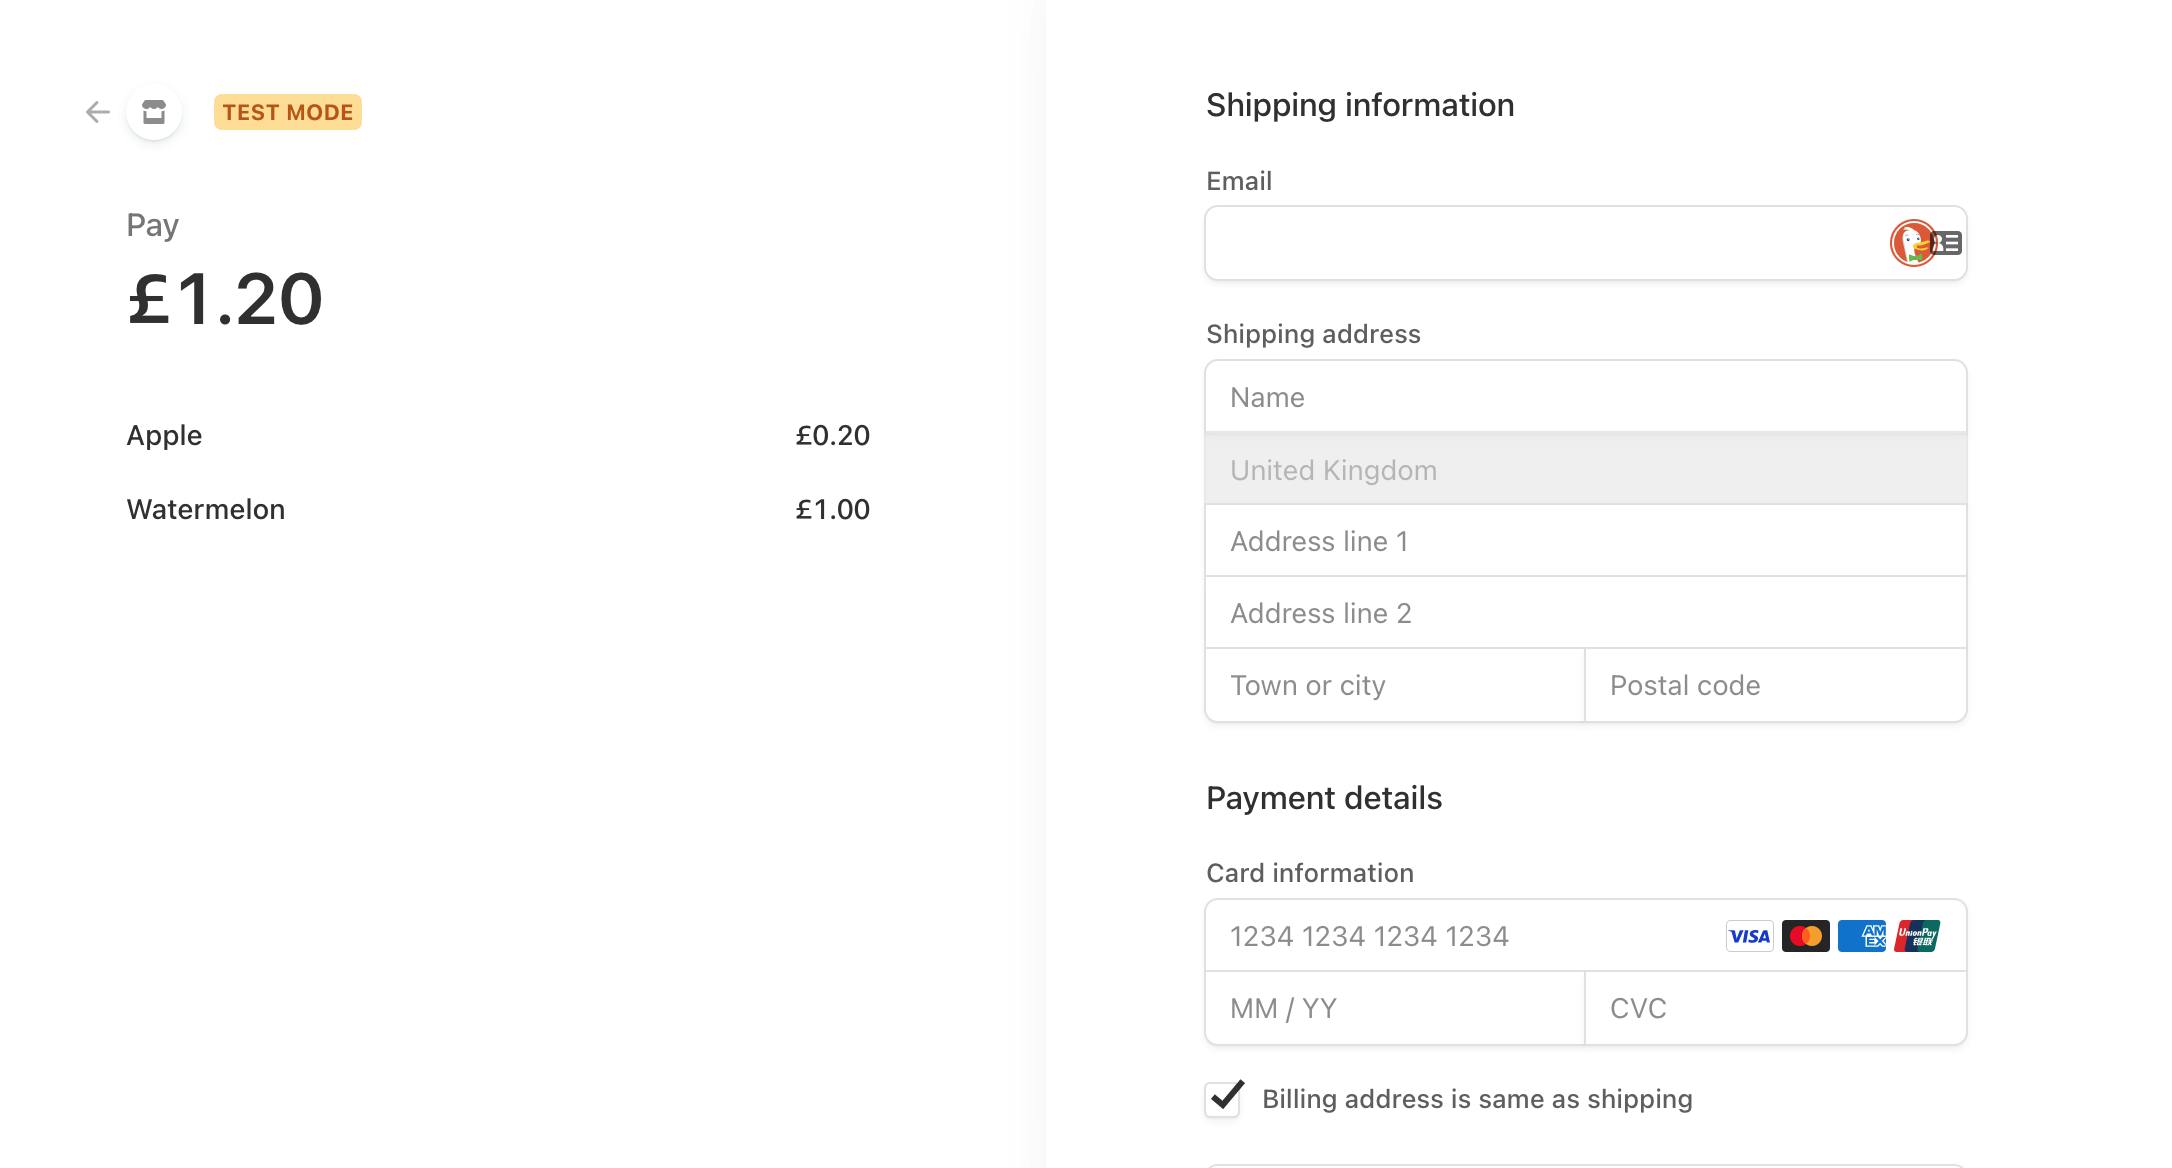 Screenshot of the Stripe Checkout page. The total price of products is £1.20 and there are form fields to enter your email, shipping address and payment details.